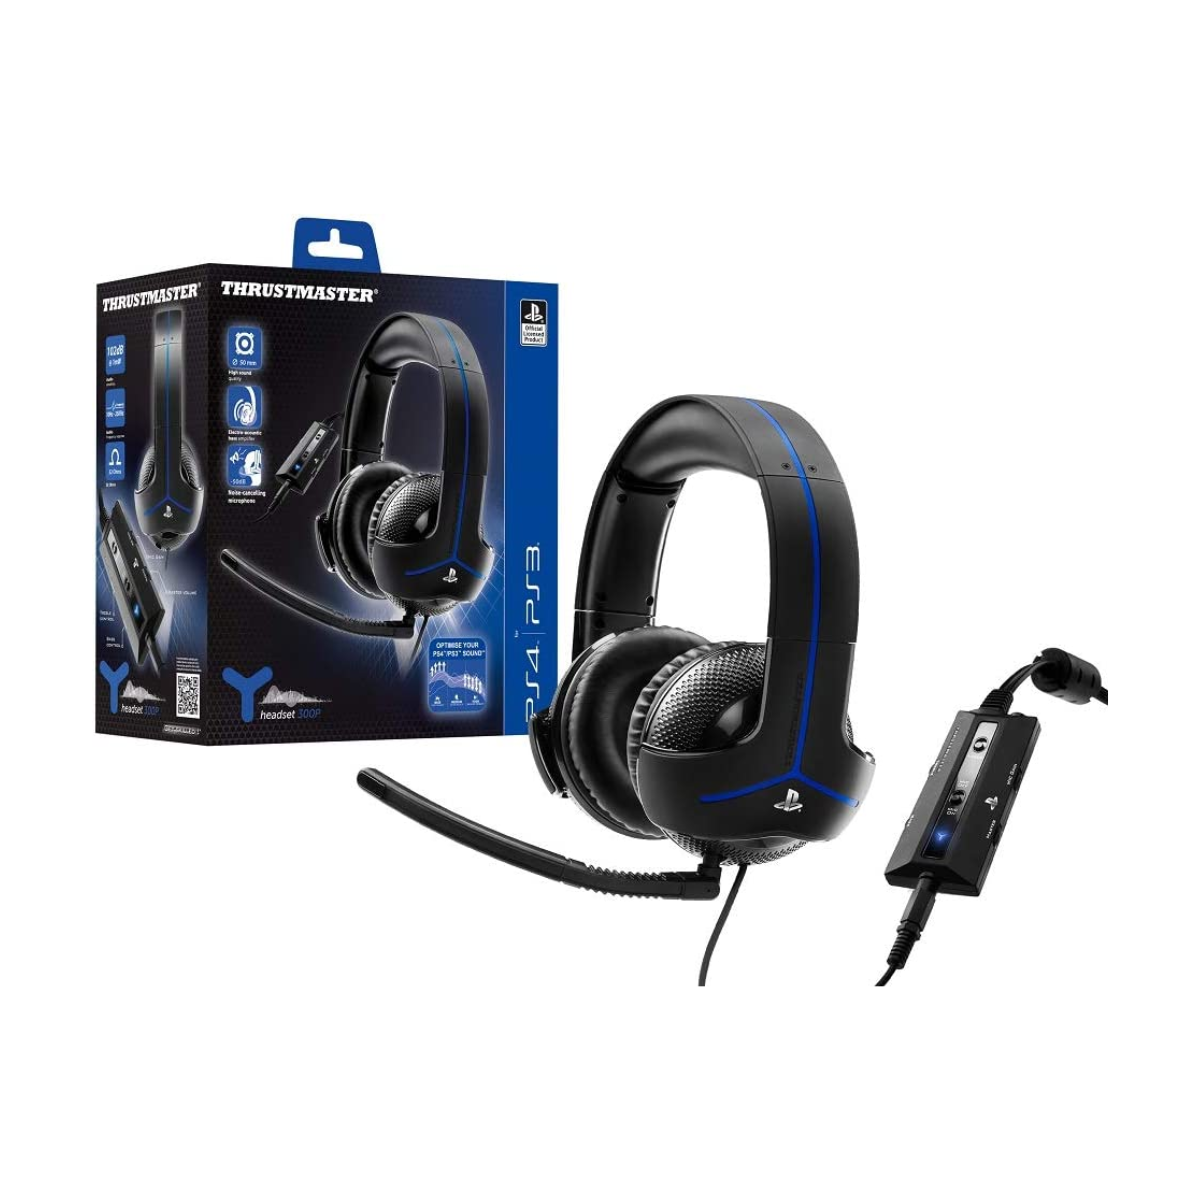 https://www.videoplusfrance.com/446327-product_full/thrustmaster-casque-gaming-y-300p-ps4-et-ps3-licence-sony.jpg